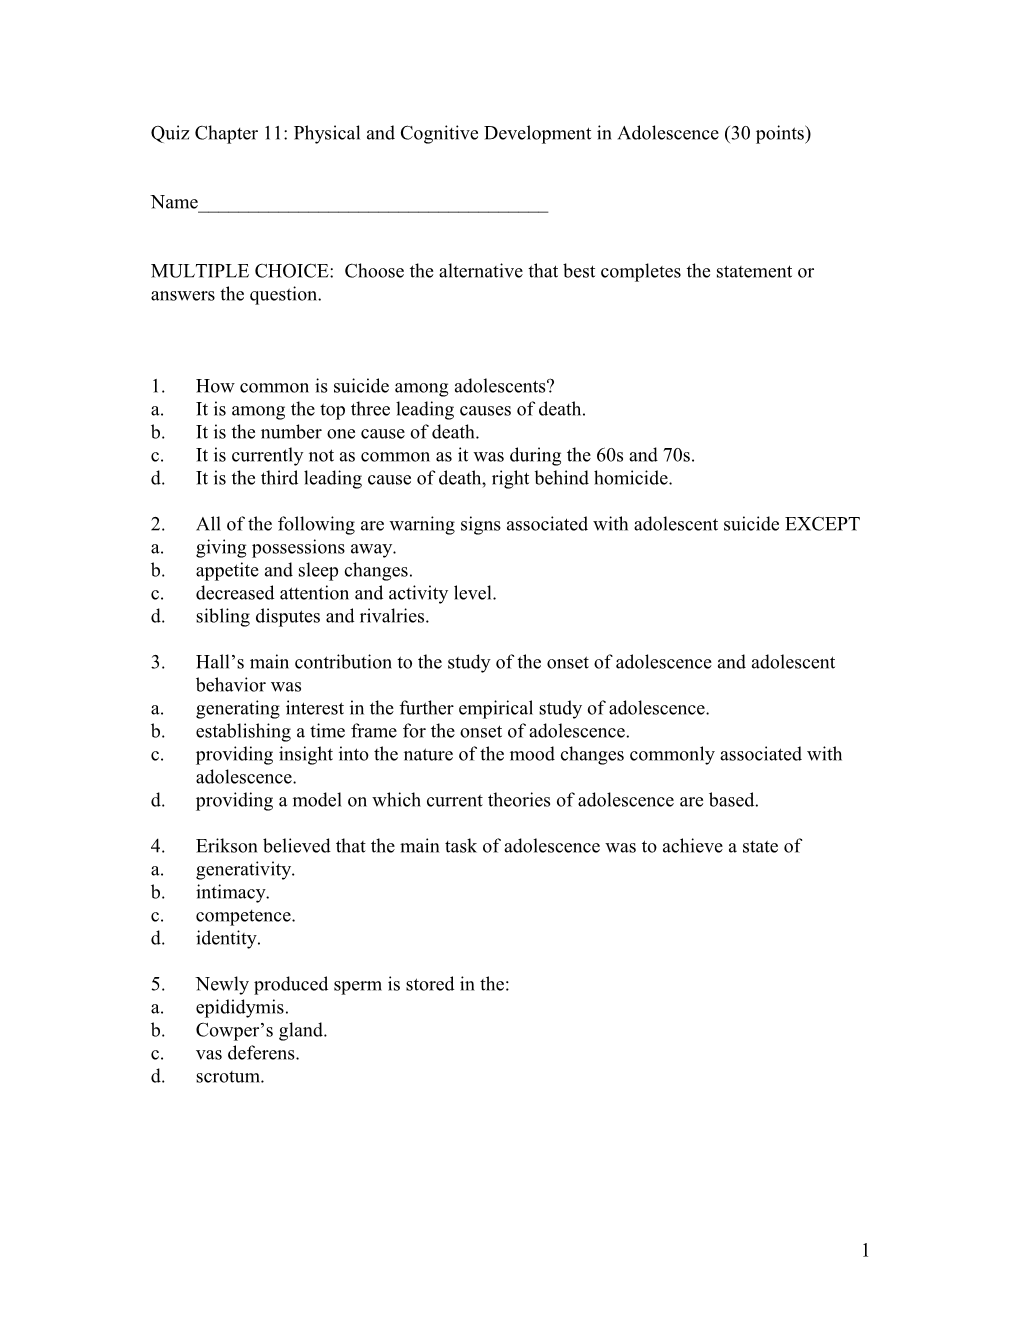 Quiz Chapter 11: Physical and Cognitive Development in Adolescence (30 Points)